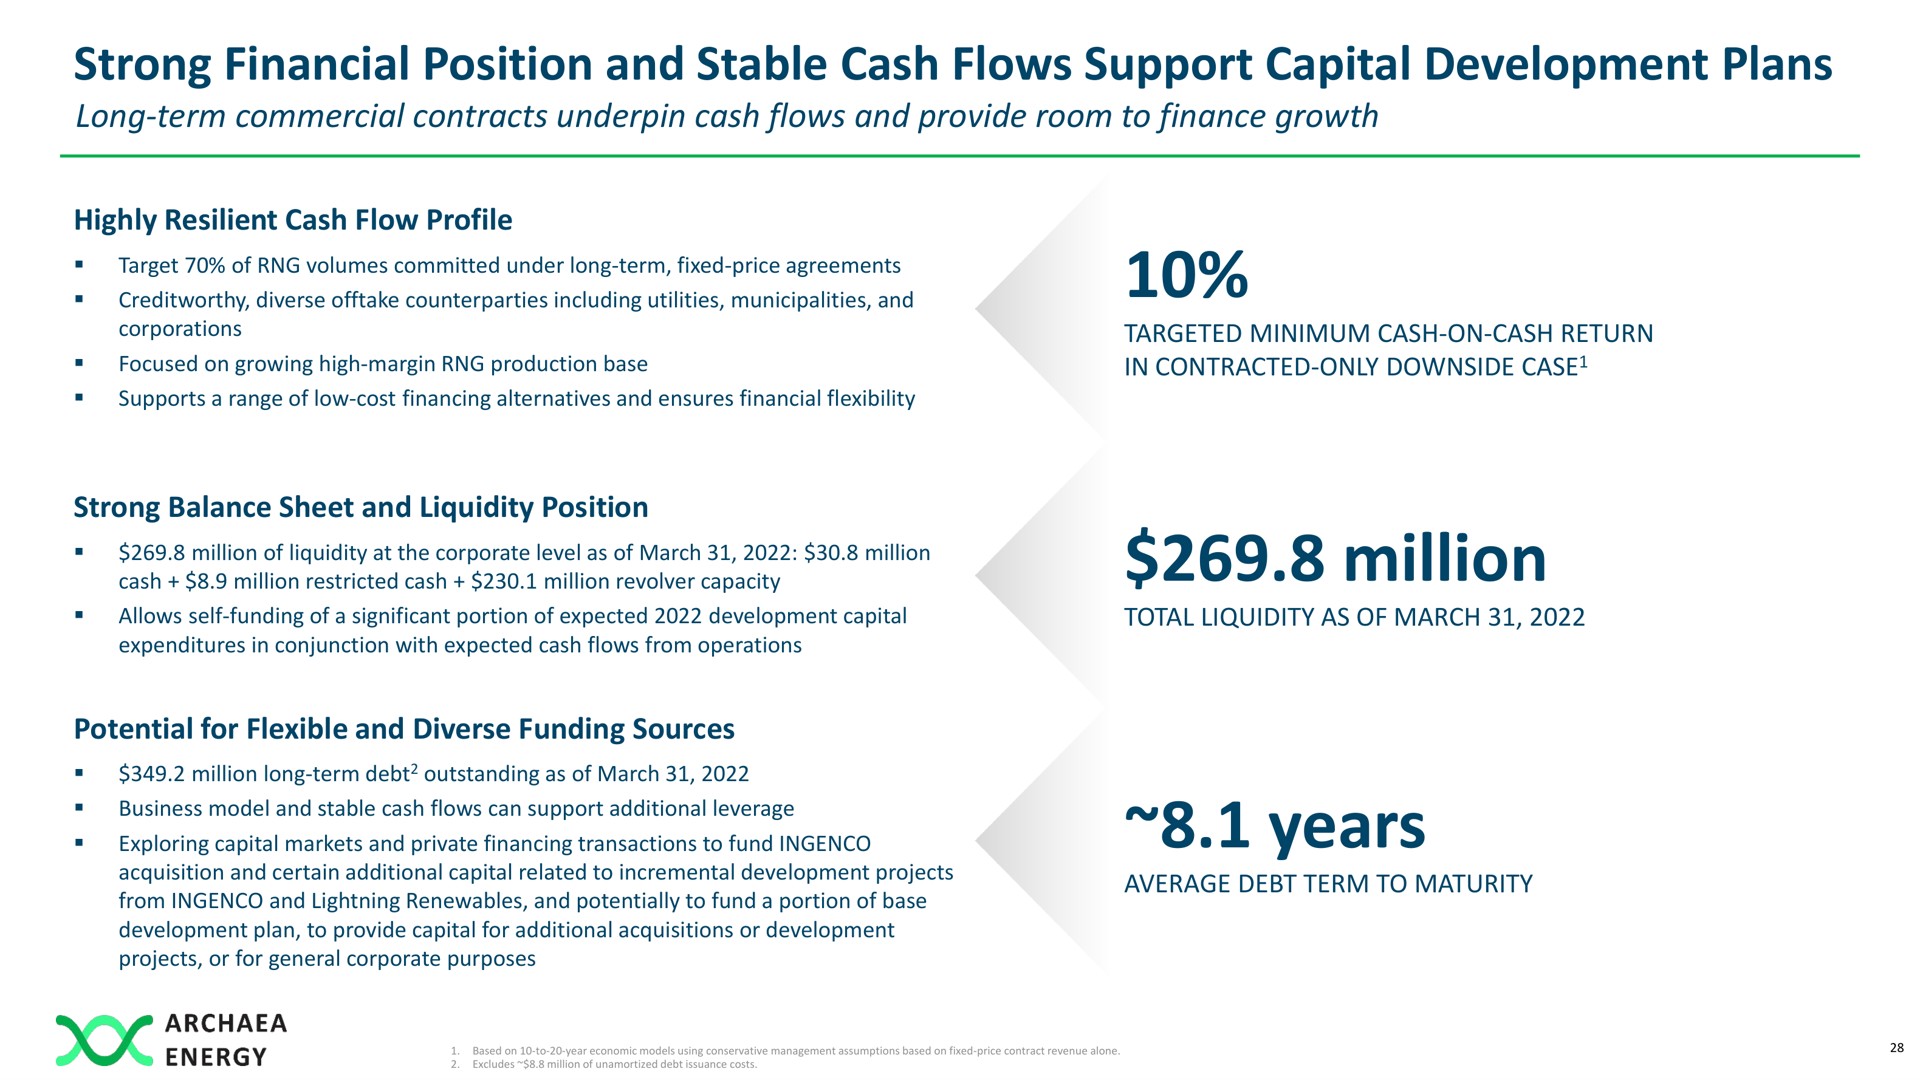 strong financial position and stable cash flows support capital development plans million years | Archaea Energy